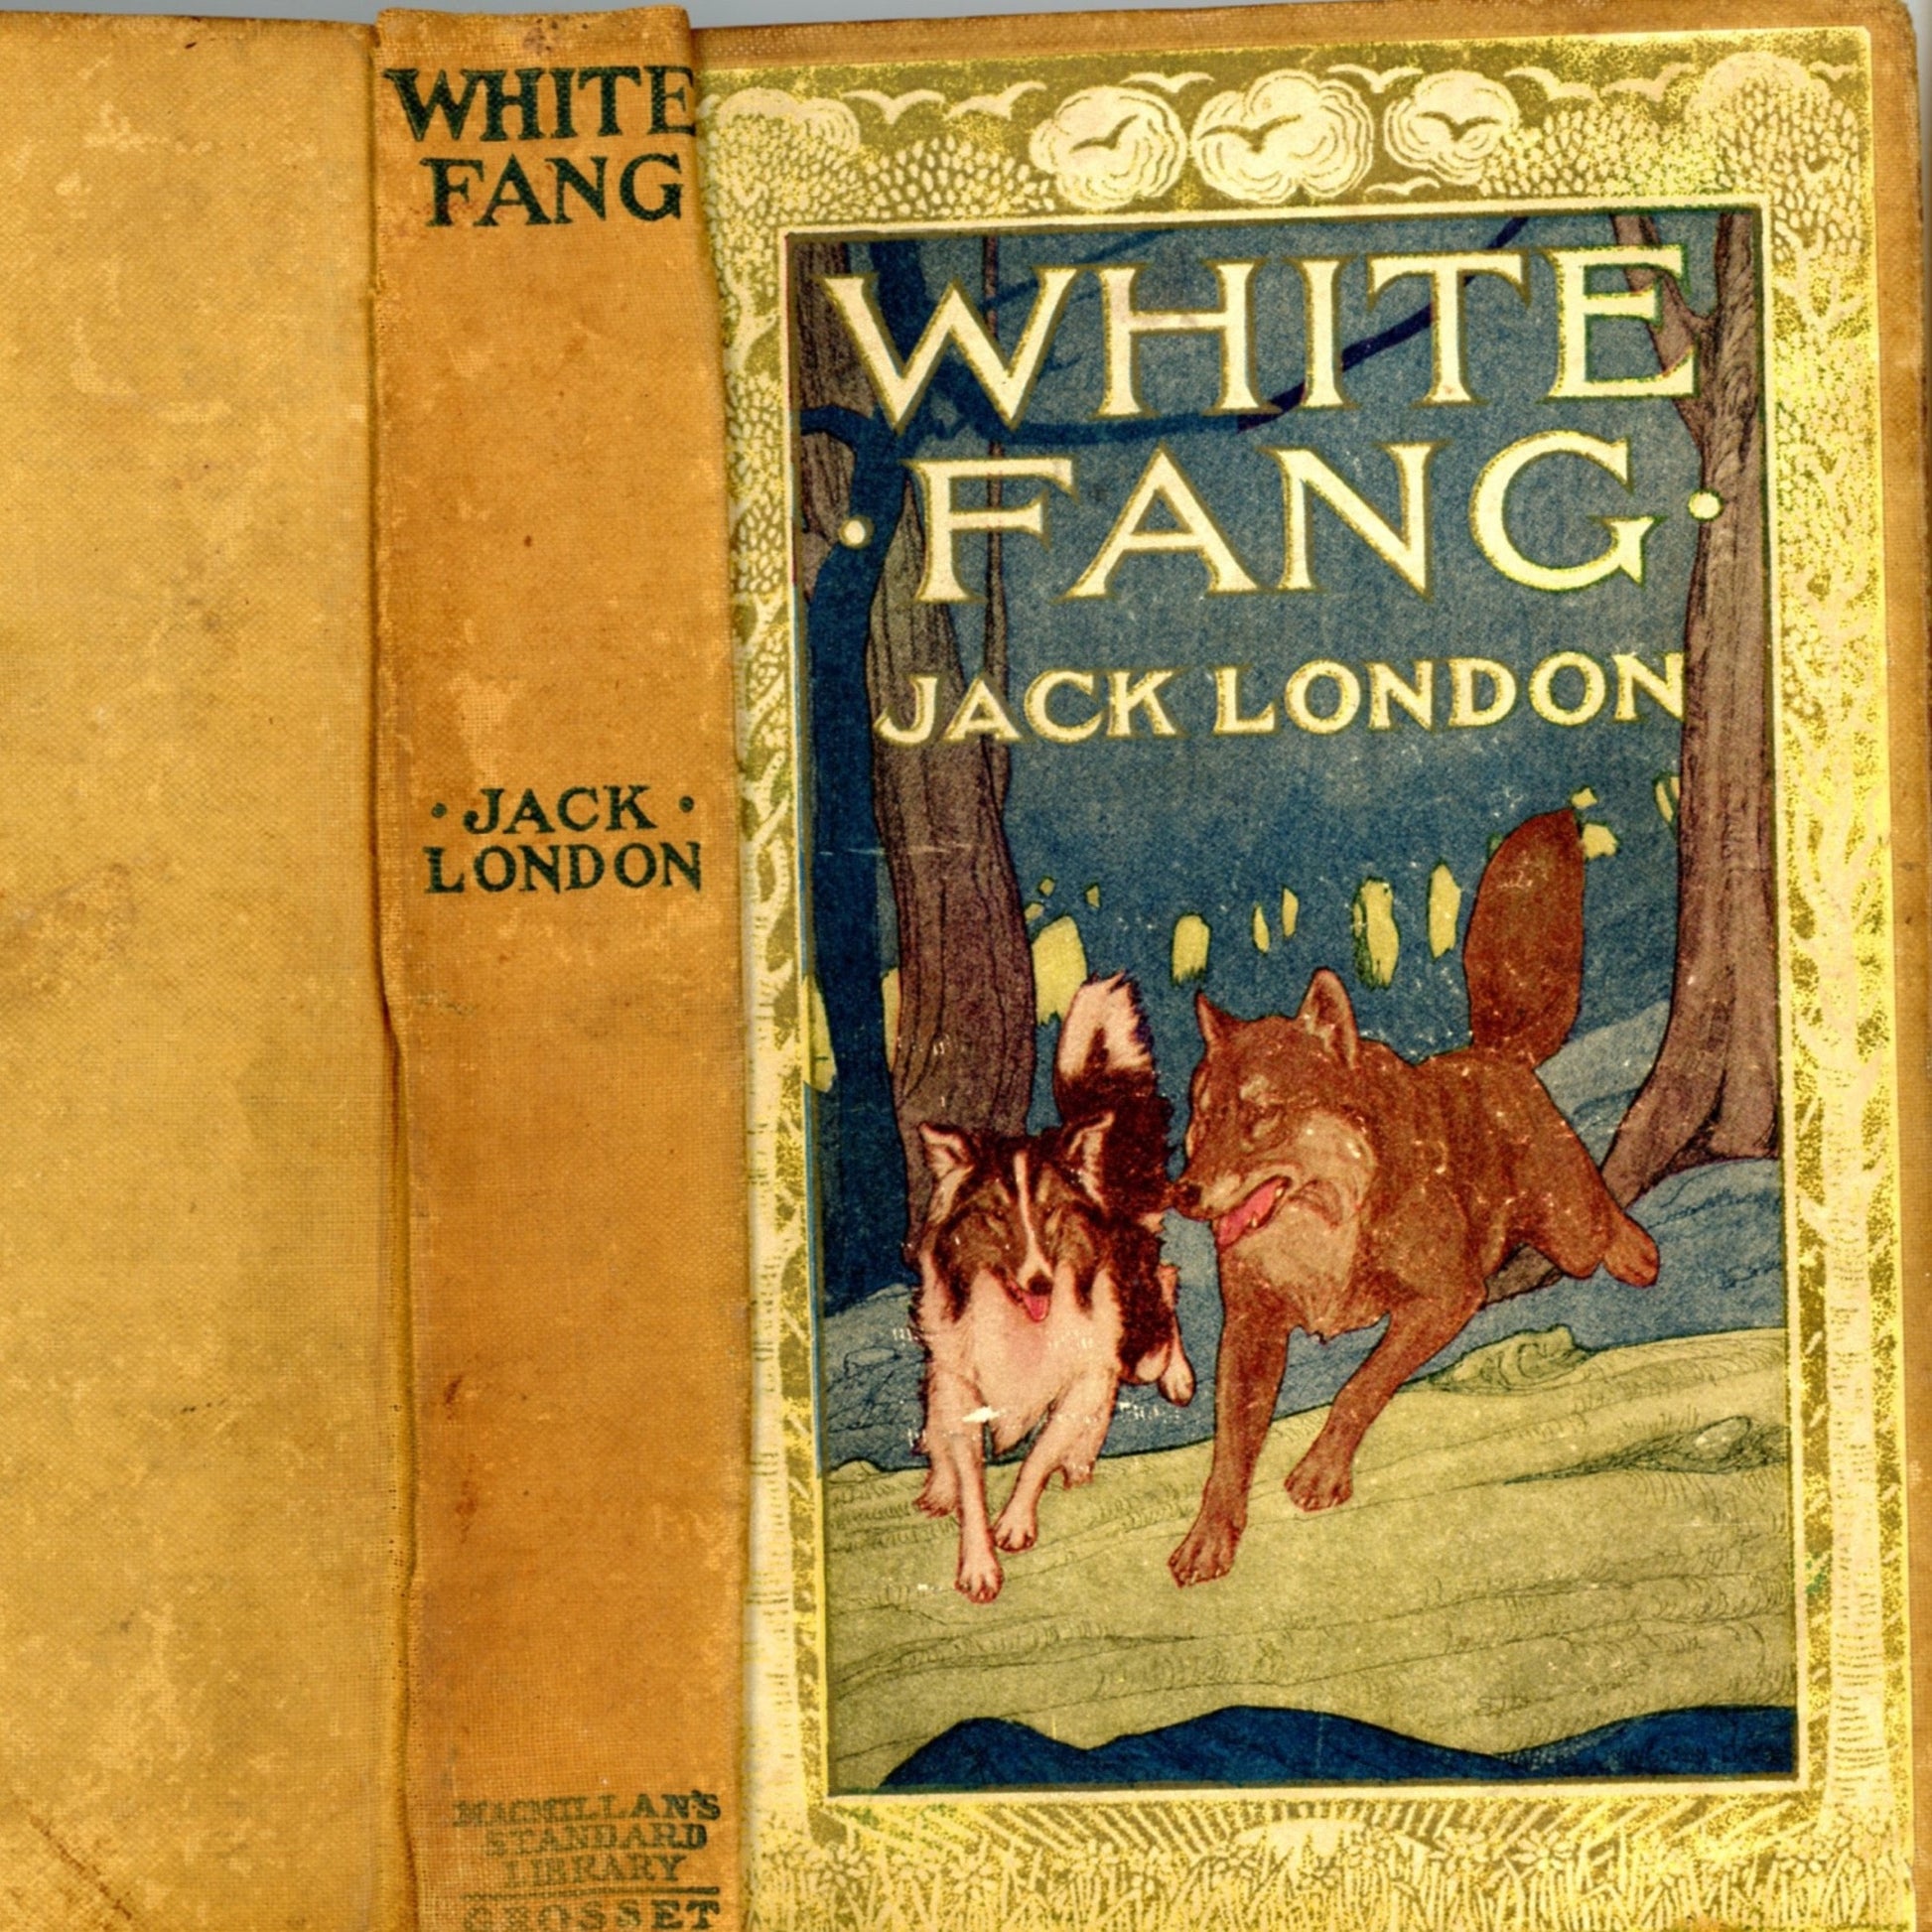 WHITE FANG by Jack London Published by The Macmillan Company 1912 ©1906